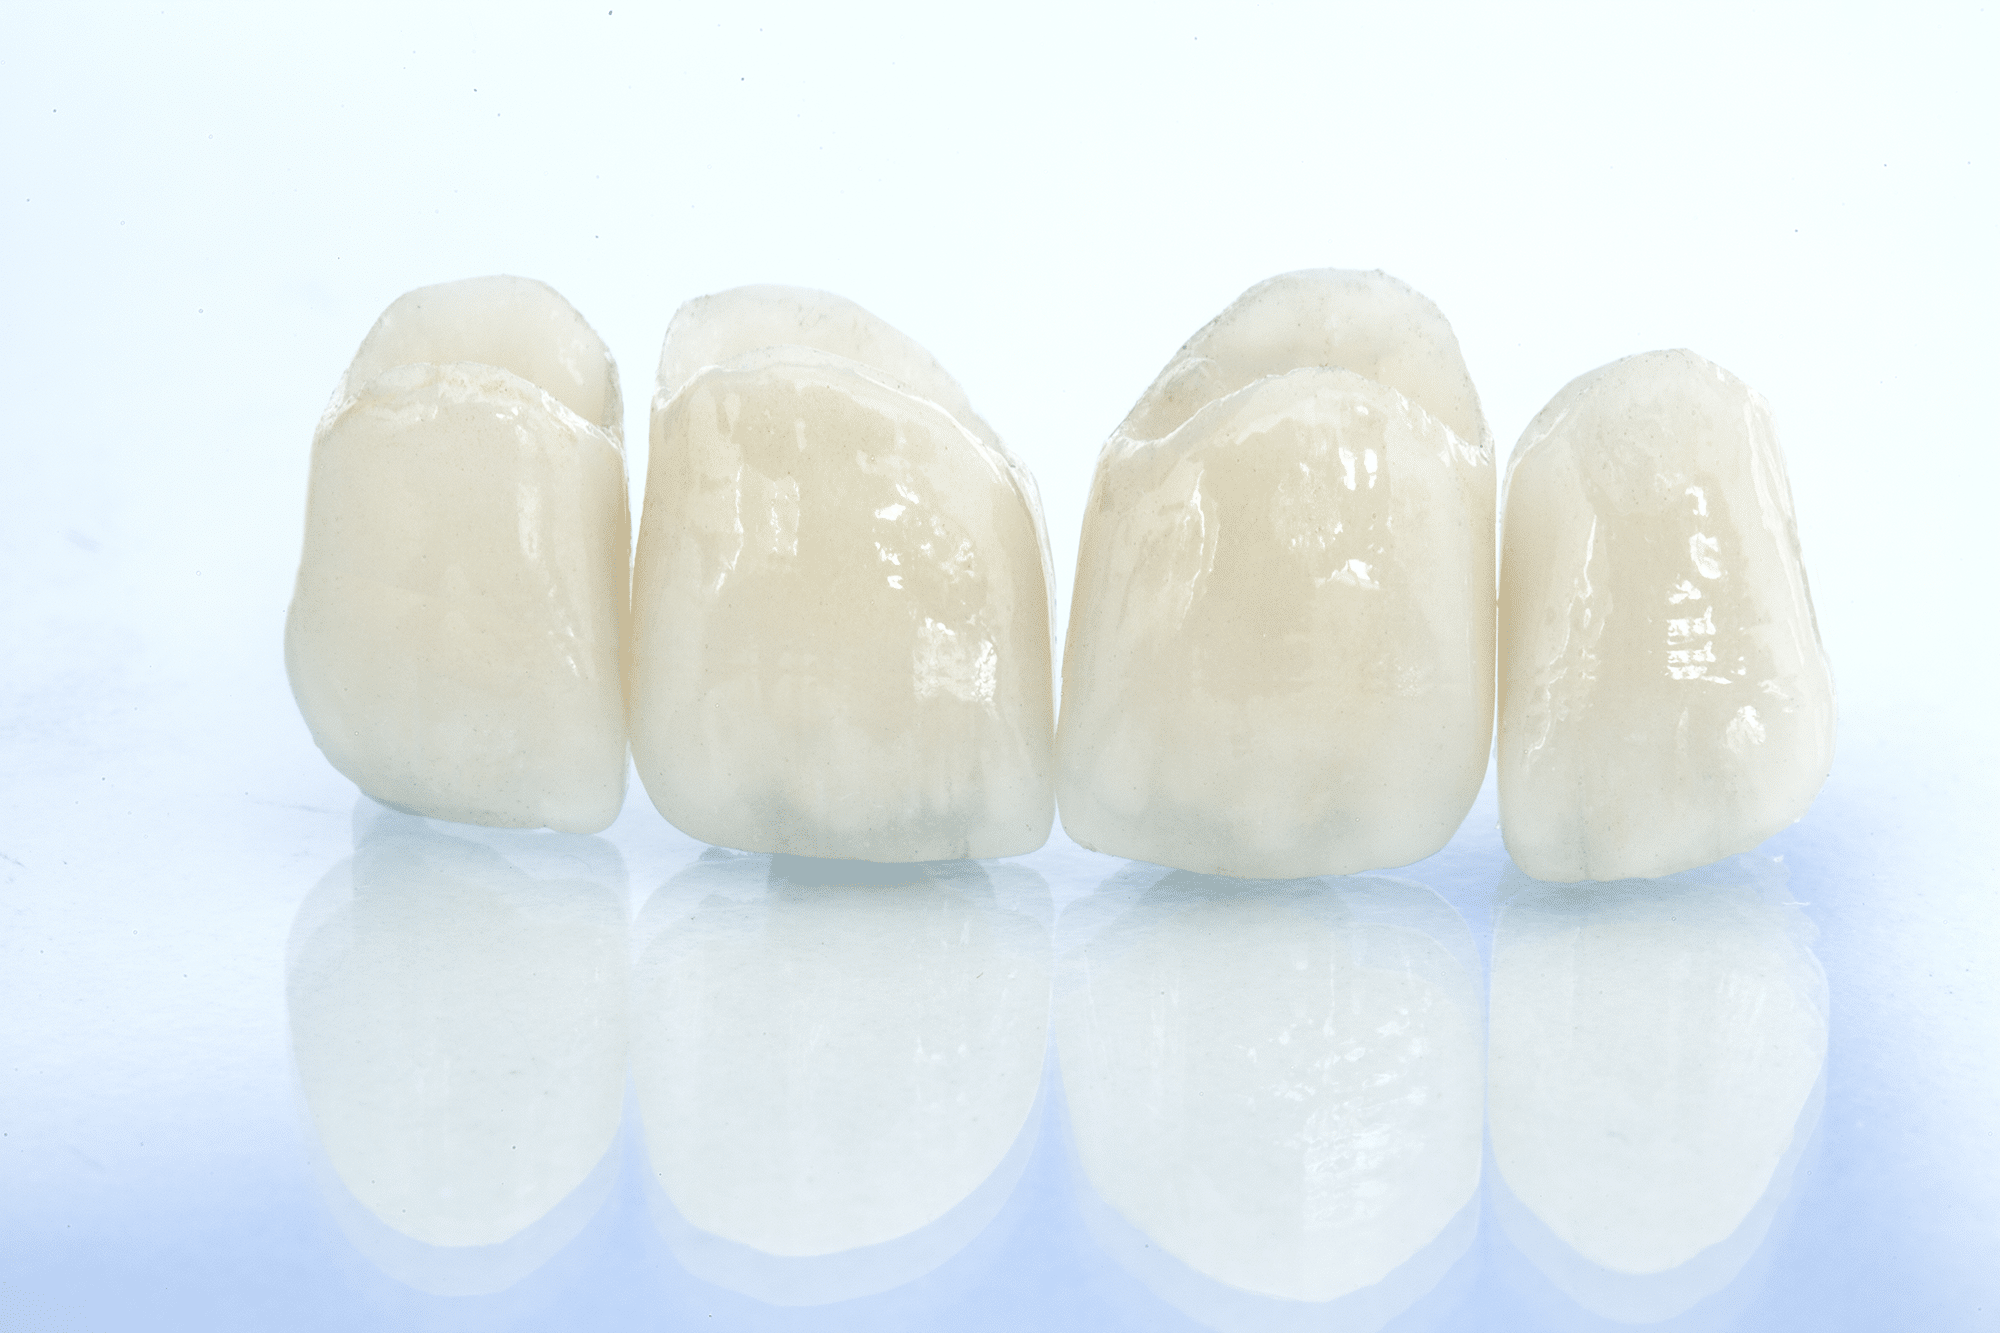 what are the different types of dental crowns Genesis Dental and Orthodontics bright smiles dental, dentist near me, children's dentistry, pediatric dentistry, family dentisry, general dentistry, cosmetic dentistry, braces, metal braces, traditional braces, invisalign, clearcorrect, clear aligners, damon brackets, emergency dental dentistry, dental implant, implants, crown, crowns, cerec, filling, fillings, sealant, sealants, bond, bonding, frenectomy, gum recontouring, root planing, dentures, partial denture, full dentures, implant retained denture, cracked tooth, loose teeth, discolored tooth porcelain fillings, tooth-colored amalgam fillings, dental exam, xray, cleaning, cleanings, teeth whitening, zoom whitening, dentist open on saturday, dentist open on sunday, emergency dentist serving utah and kansas, serving SALT LAKE CITY, UT,TAYLORSVILLE, UT, SOUTH JORDAN, UT, OREM, UT, MAGNA, UT, WEST VALLEY CITY, UT, DISTRICT ORTHODONTICS UT, BRIGHT SMILES DENTAL UT, THANKSGIVING POINT, CENTRAL AVE DENTAL KS, OVERLAND PARK, KS